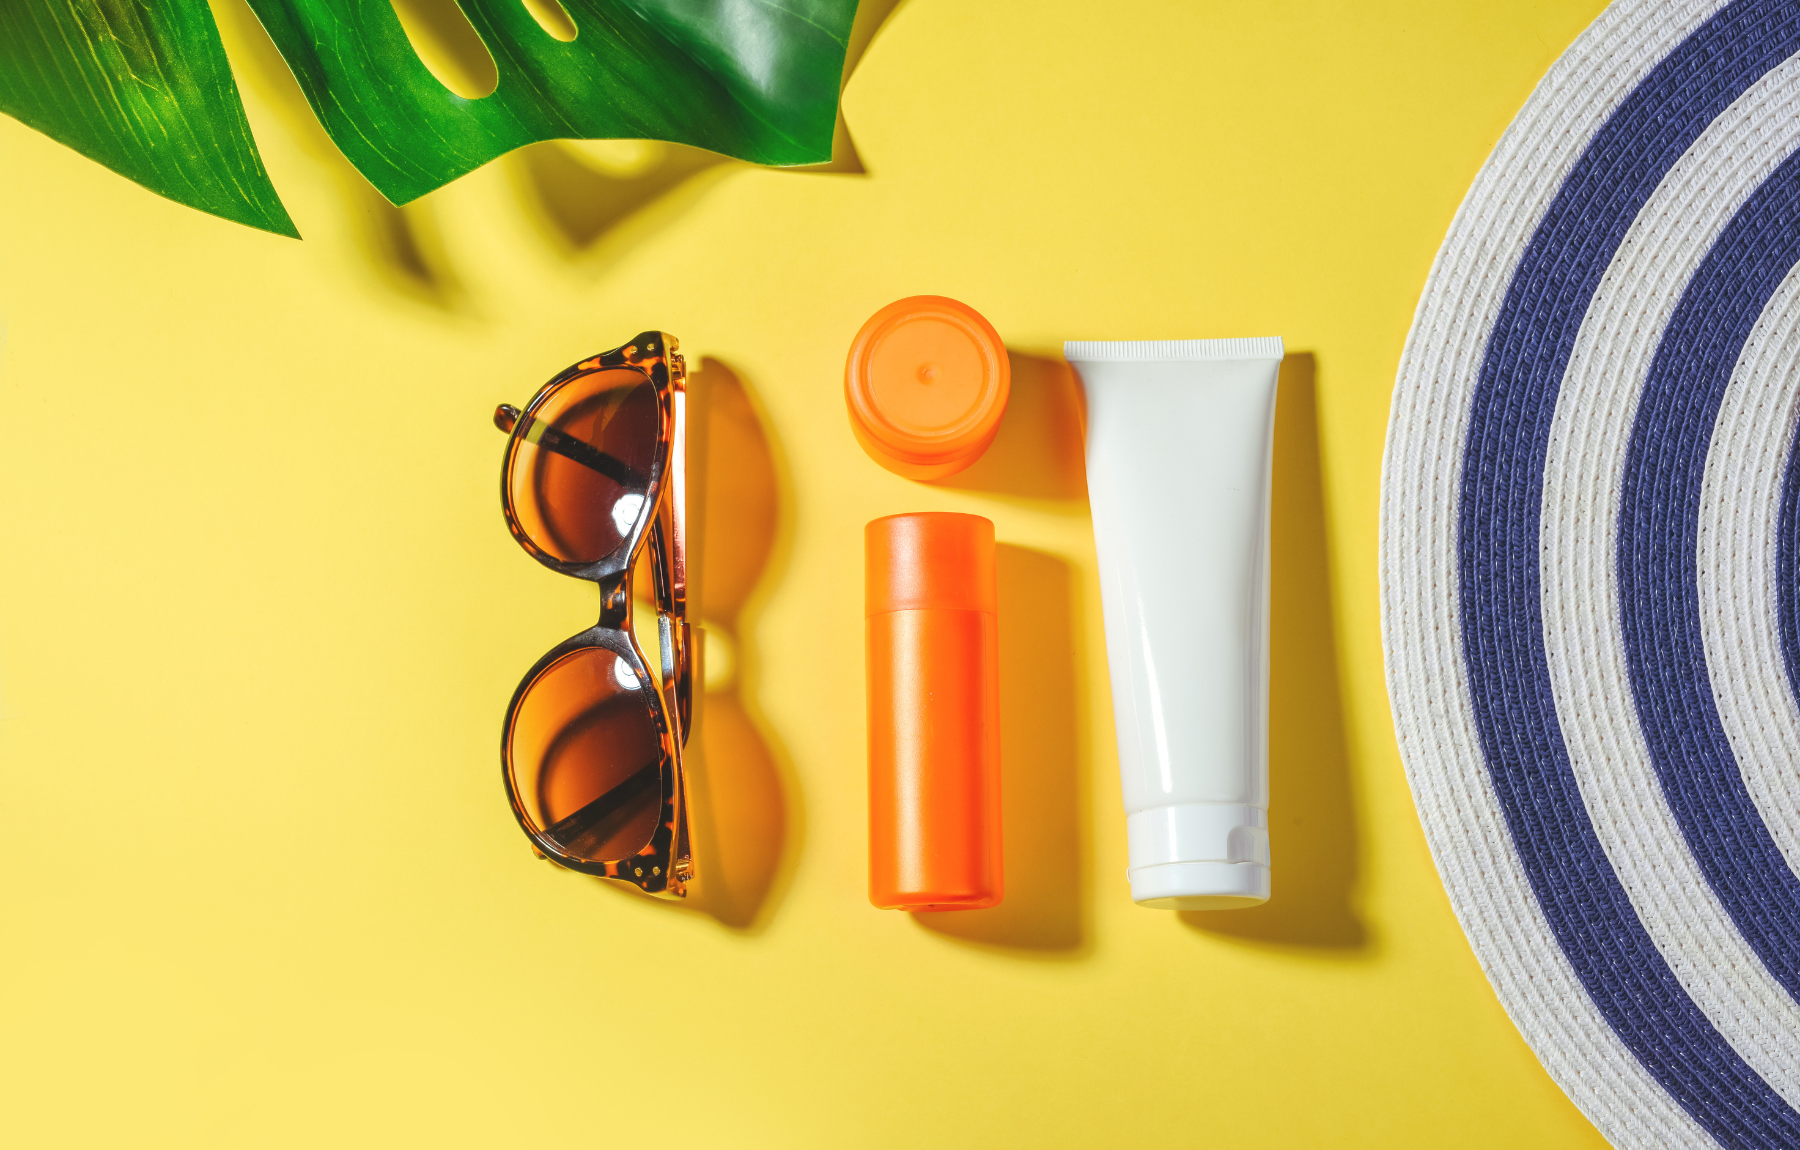 Sunglasses and sunscreen laid out on yellow table, preparing for the beach